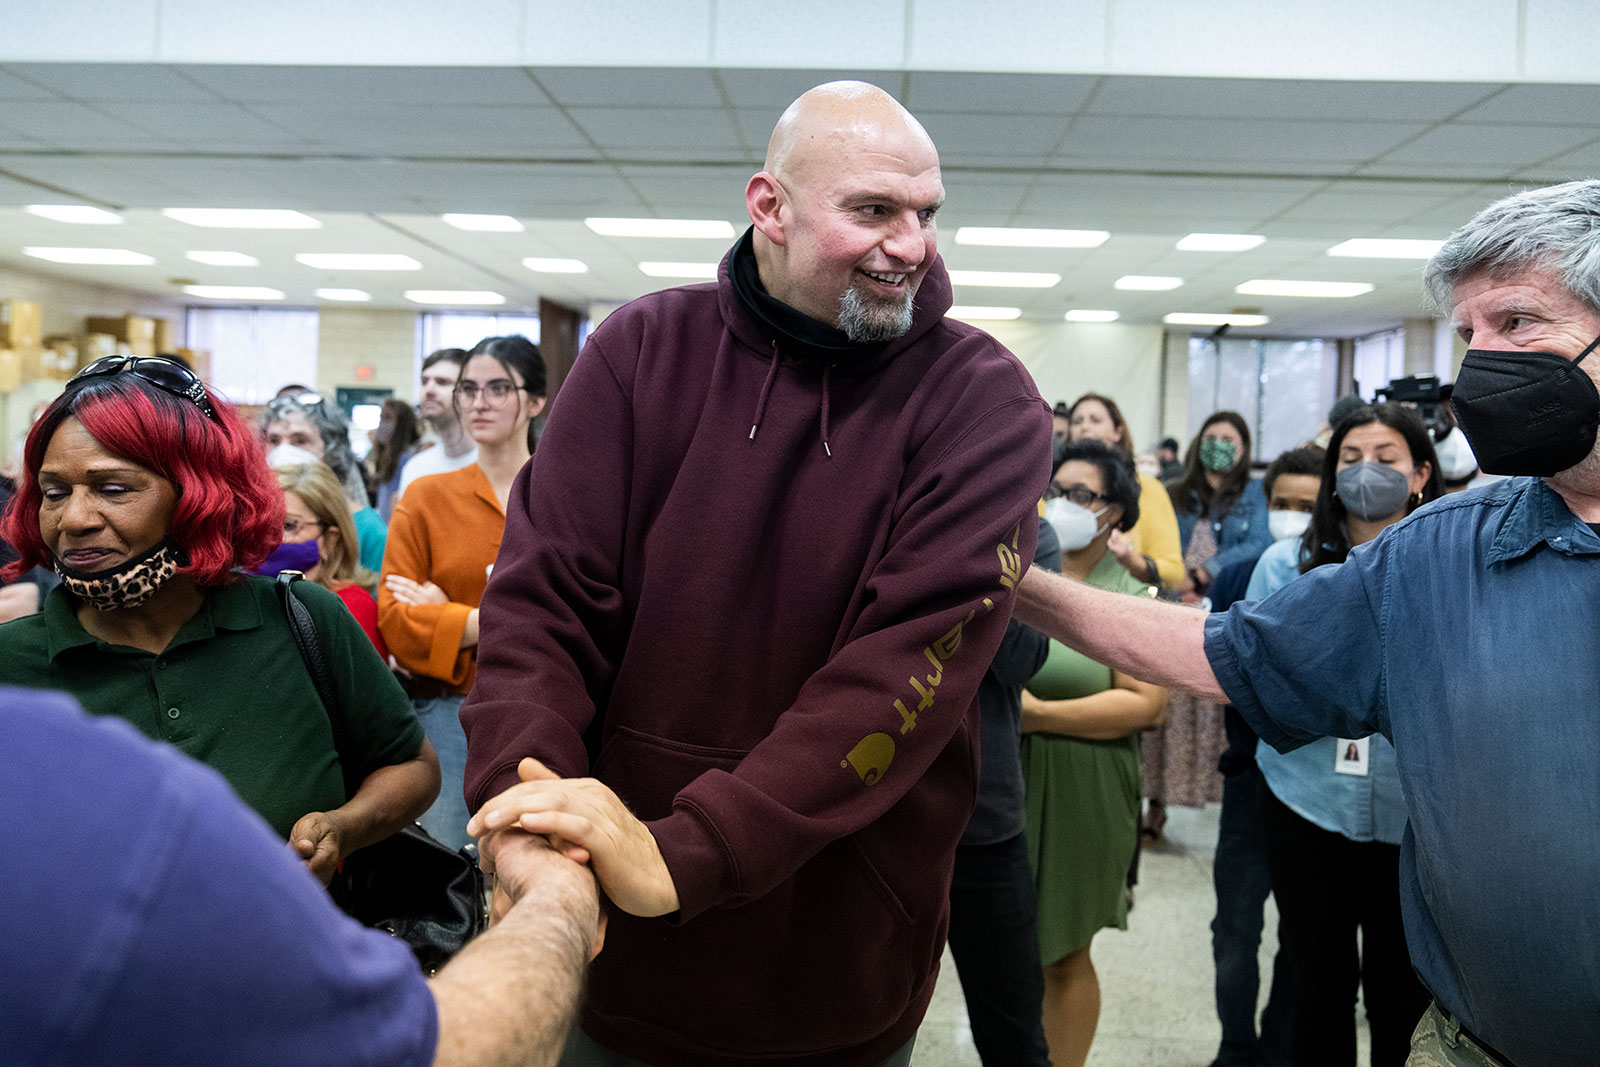 Lt. Gov. John Fetterman greets guests during a rally at the UFCW Local 1776 KS headquarters in Plymouth Meeting, Pennsylvania, on April 16.